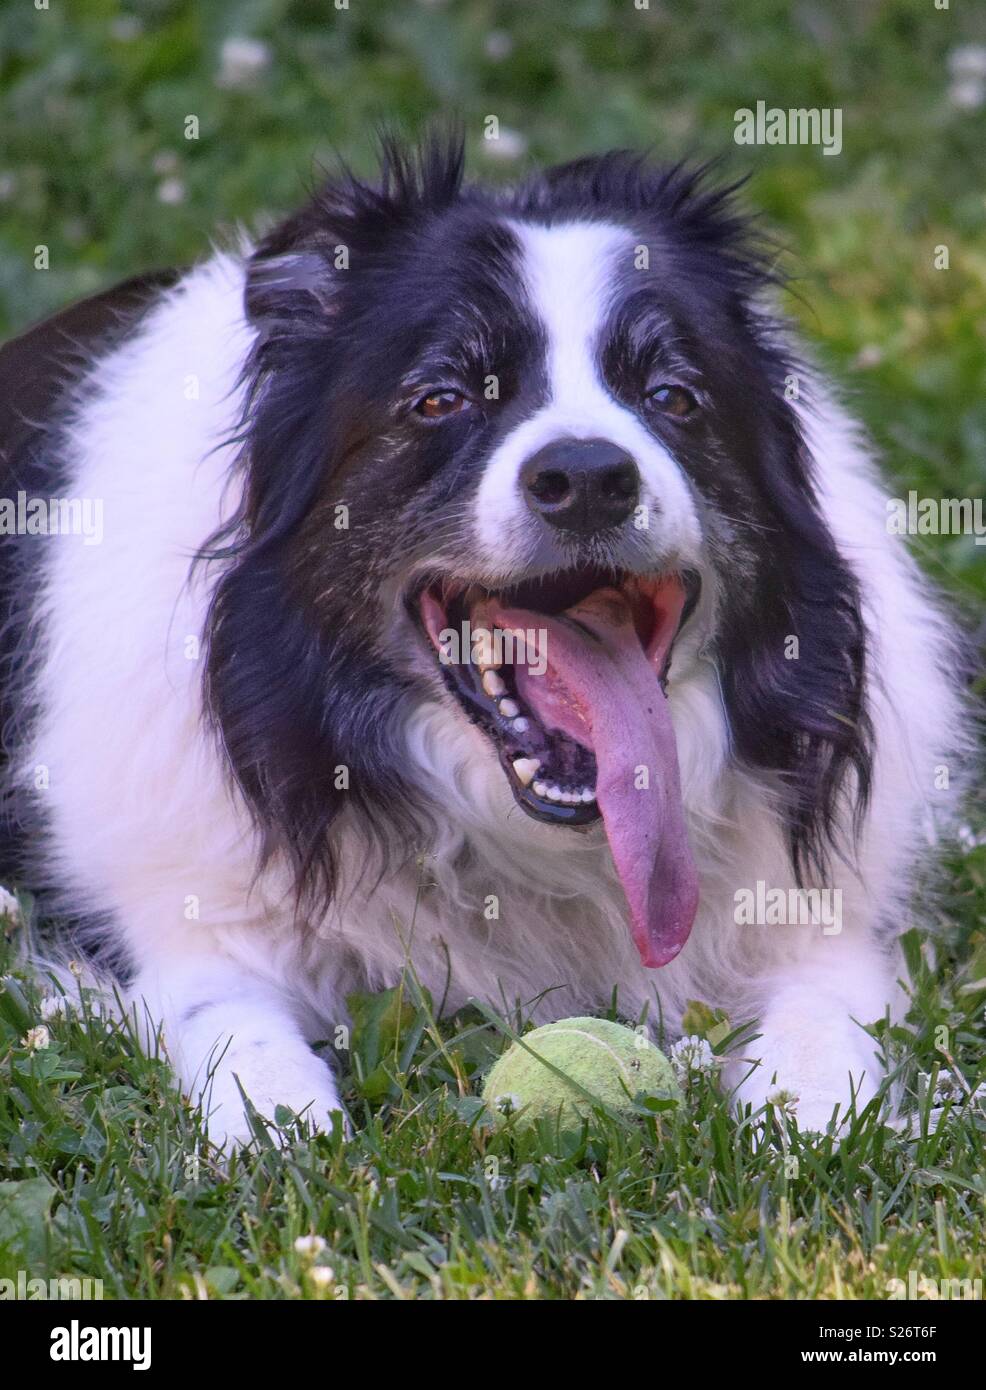 A border collie with an extra-long tongue sits on the lawn with a tennis ball. This is a great portrait of a senior dog. Stock Photo